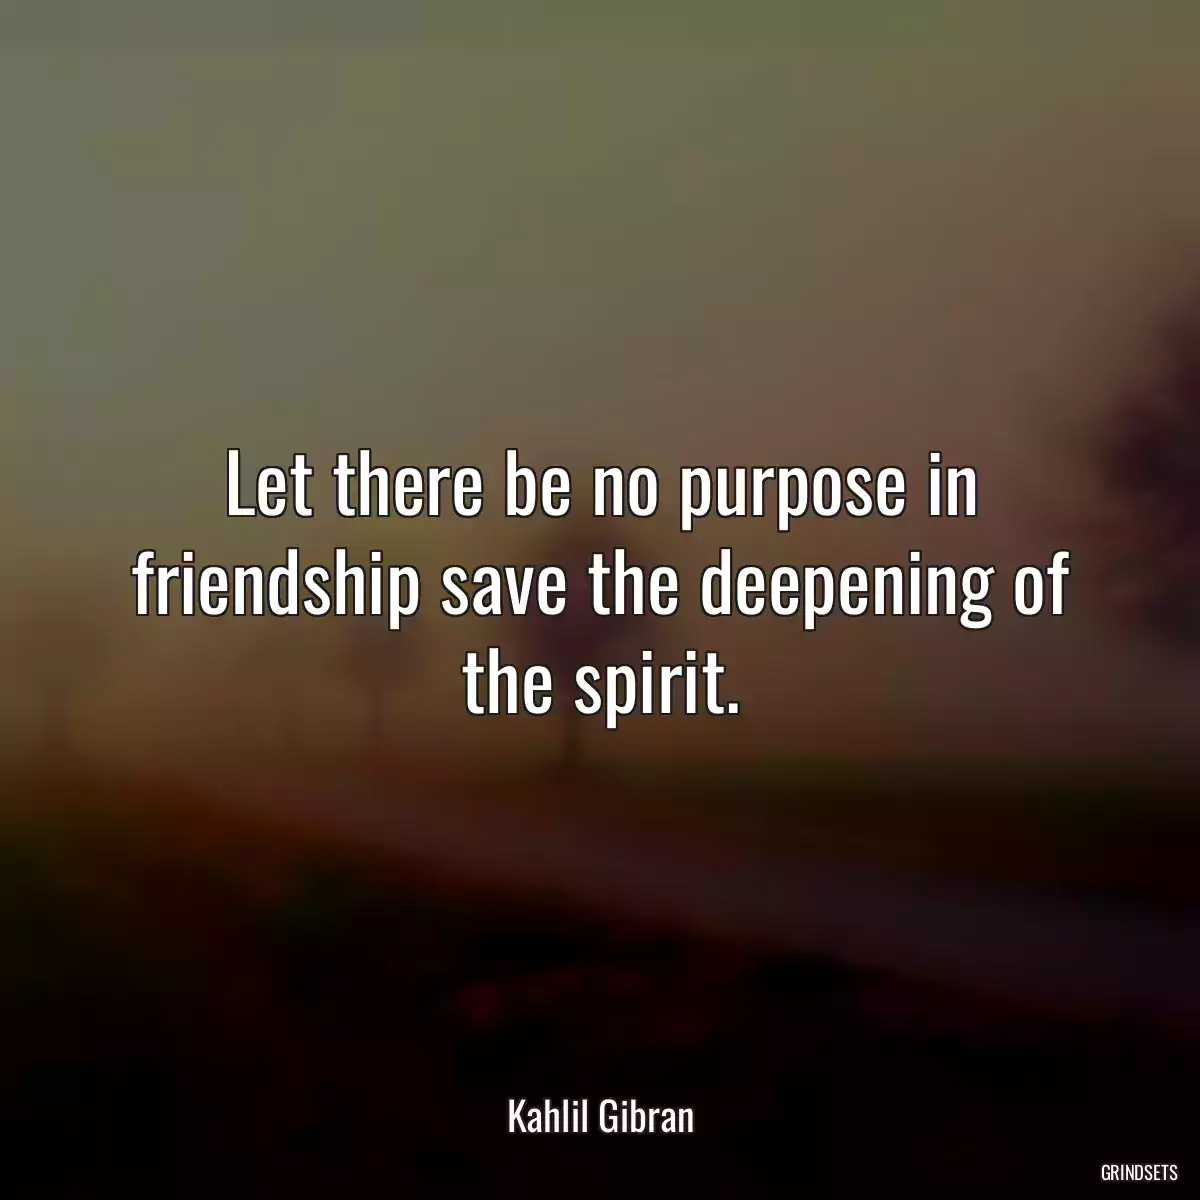 Let there be no purpose in friendship save the deepening of the spirit.